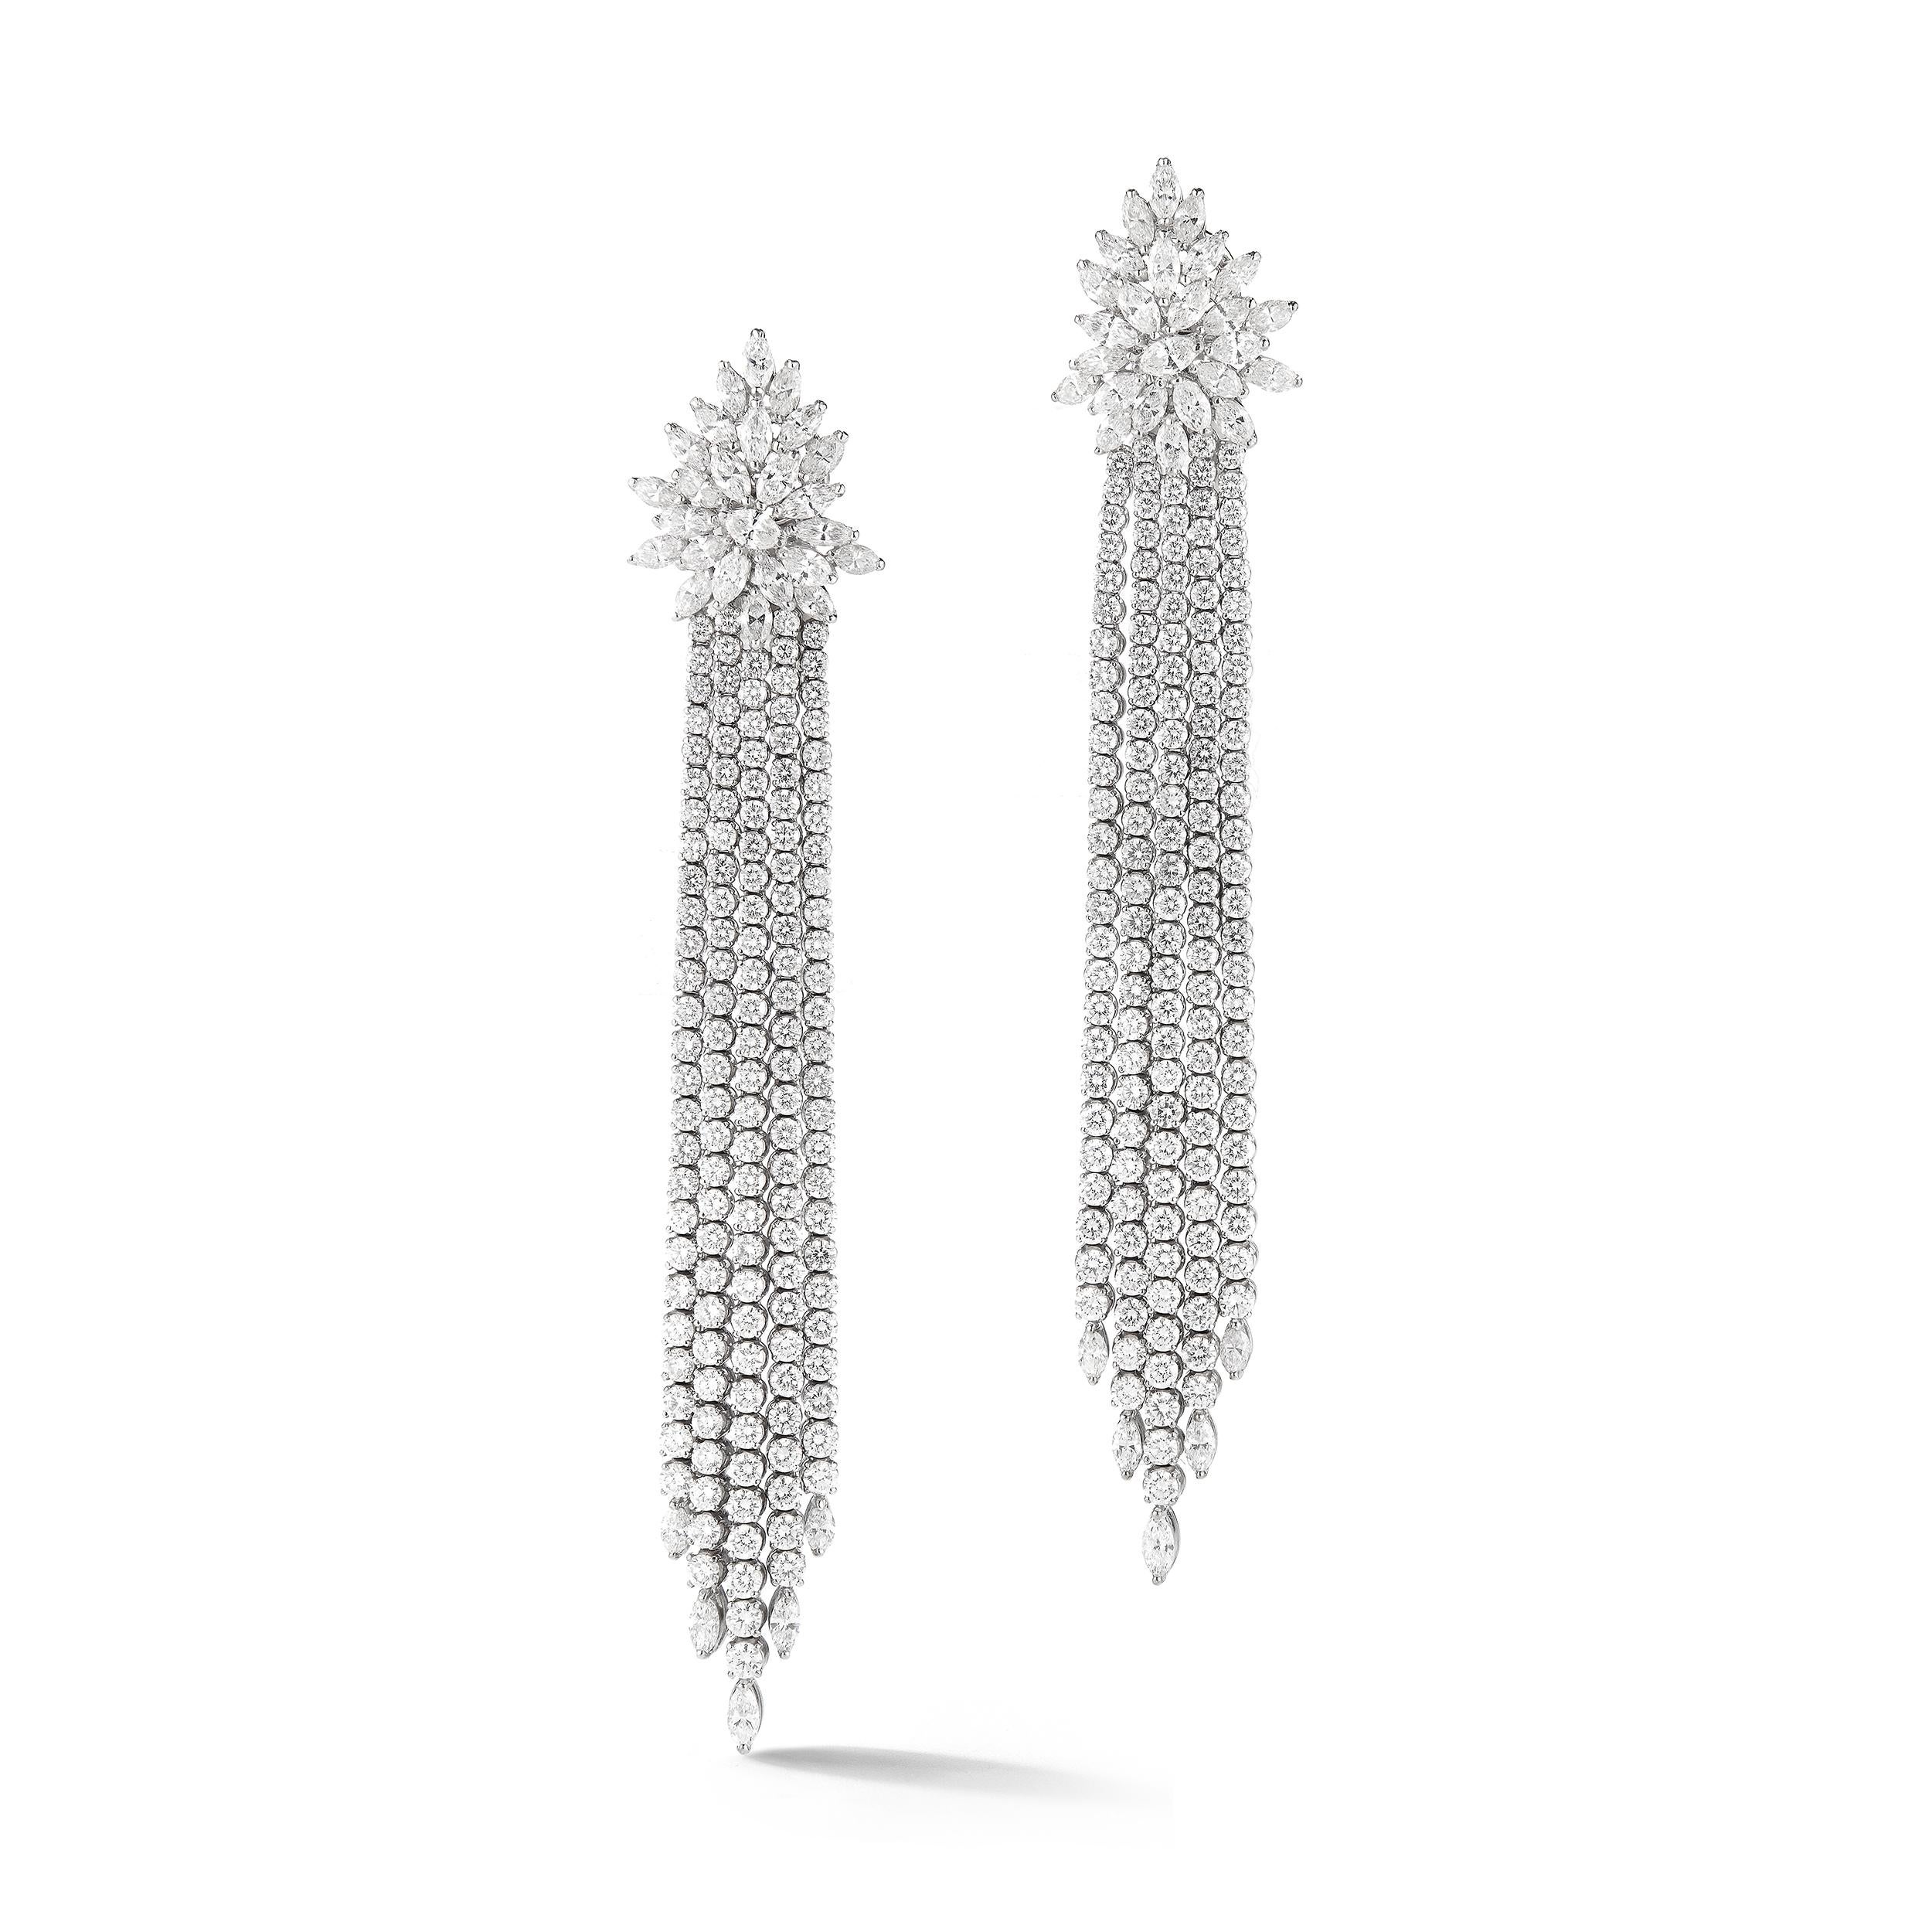 Impressive Diamond earrings, set with 27.41 carat of round Diamonds F color VS1 clarity. Can enjoy it during a Black Tie event or just a quite dinner.